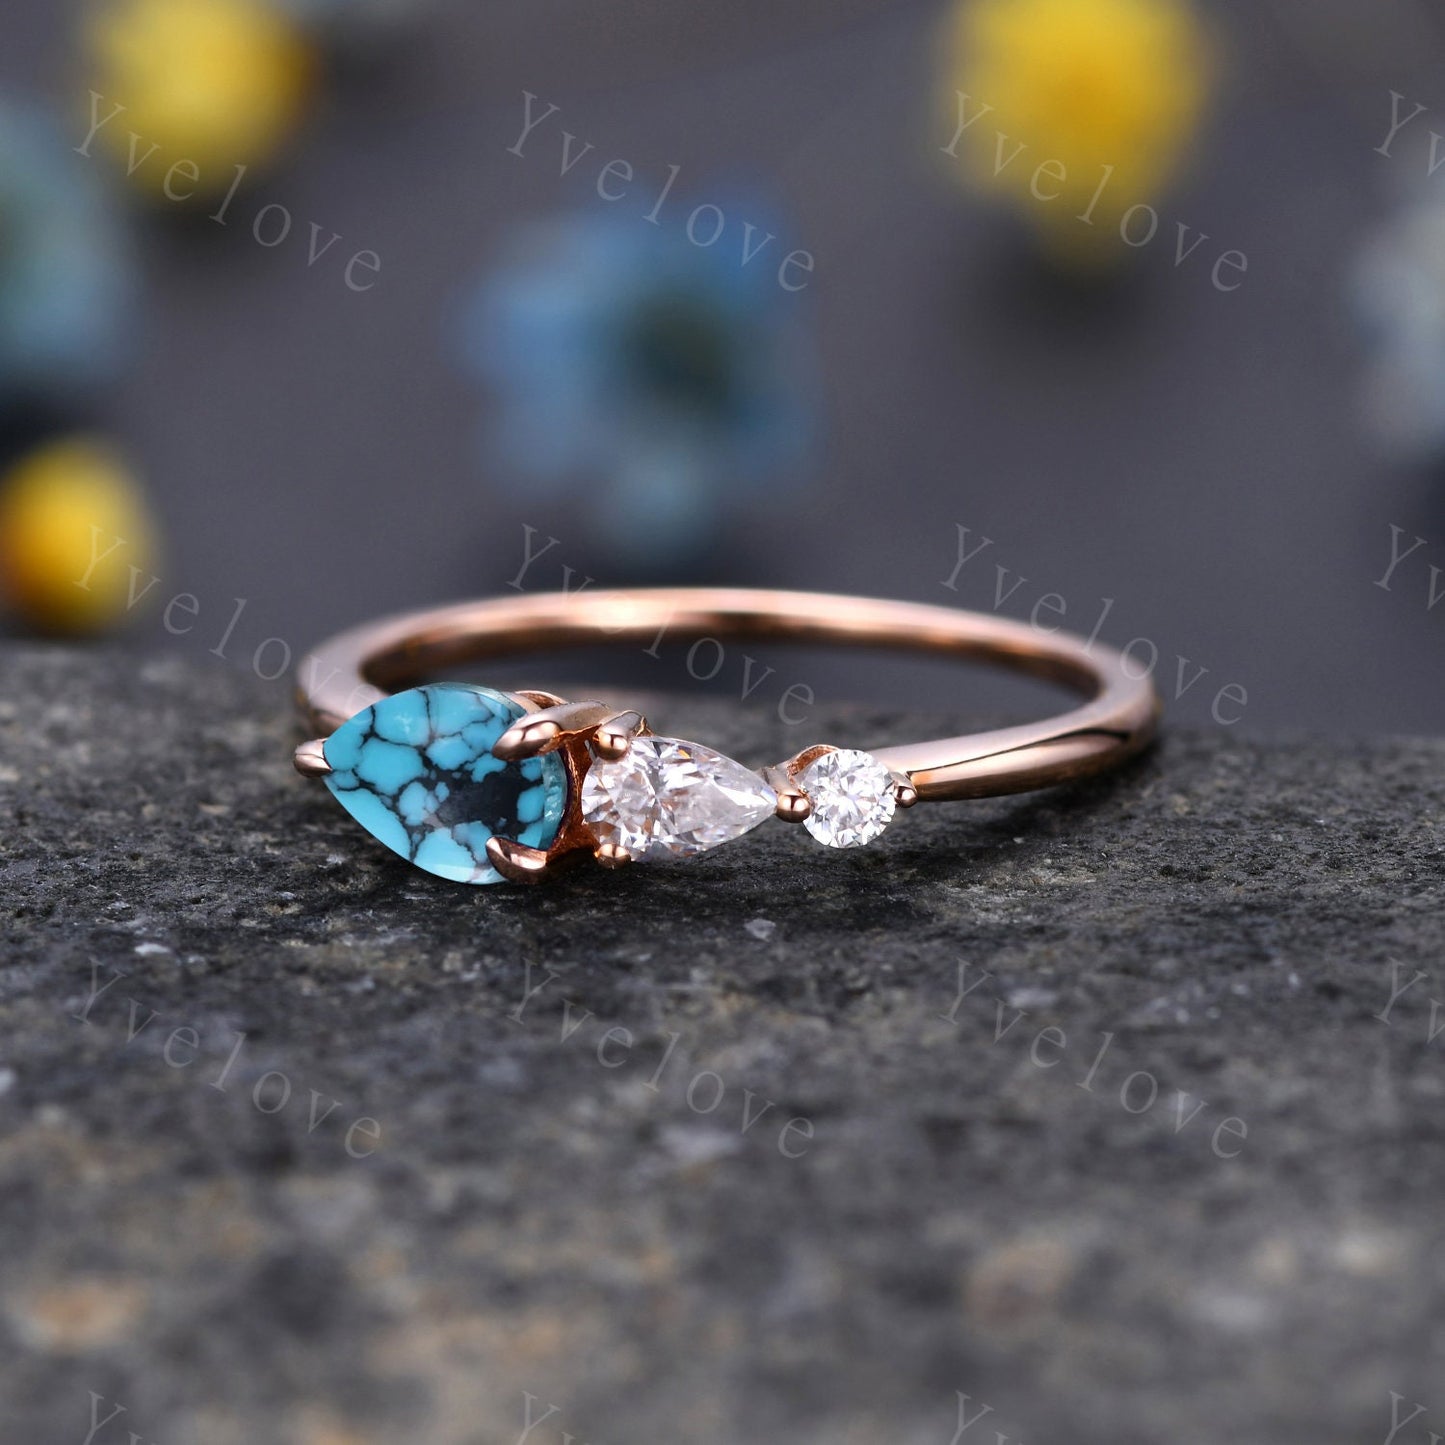 Vintage Turquoise Ring Engagement Ring,Pear Cut Gems,Art Deco Moissanite Wedding Band,3 Stone Unique Women Bridal Promise Ring,Rose gold